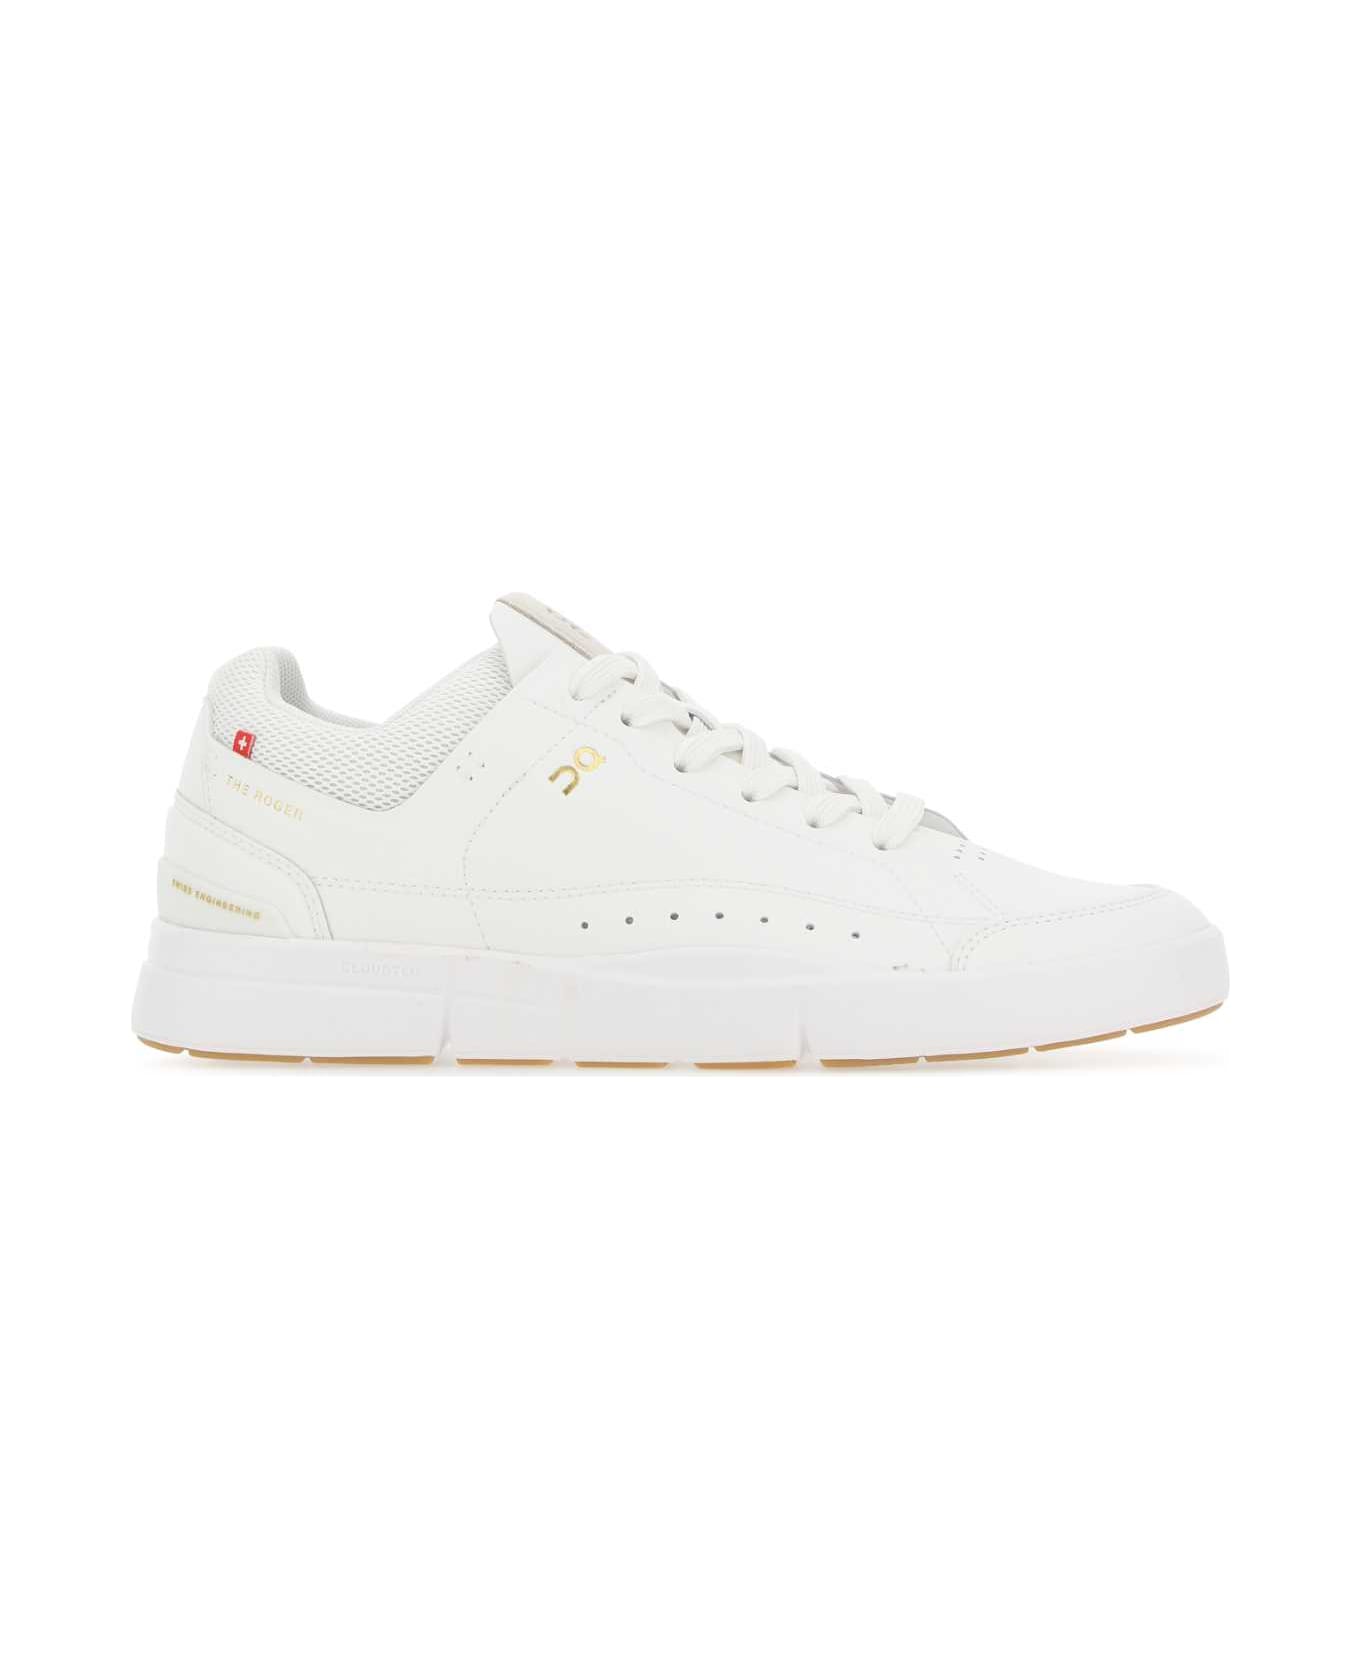 ON White Synthetic Leather And Fabric The Roger Center Court Sneakers - WHITEGUM